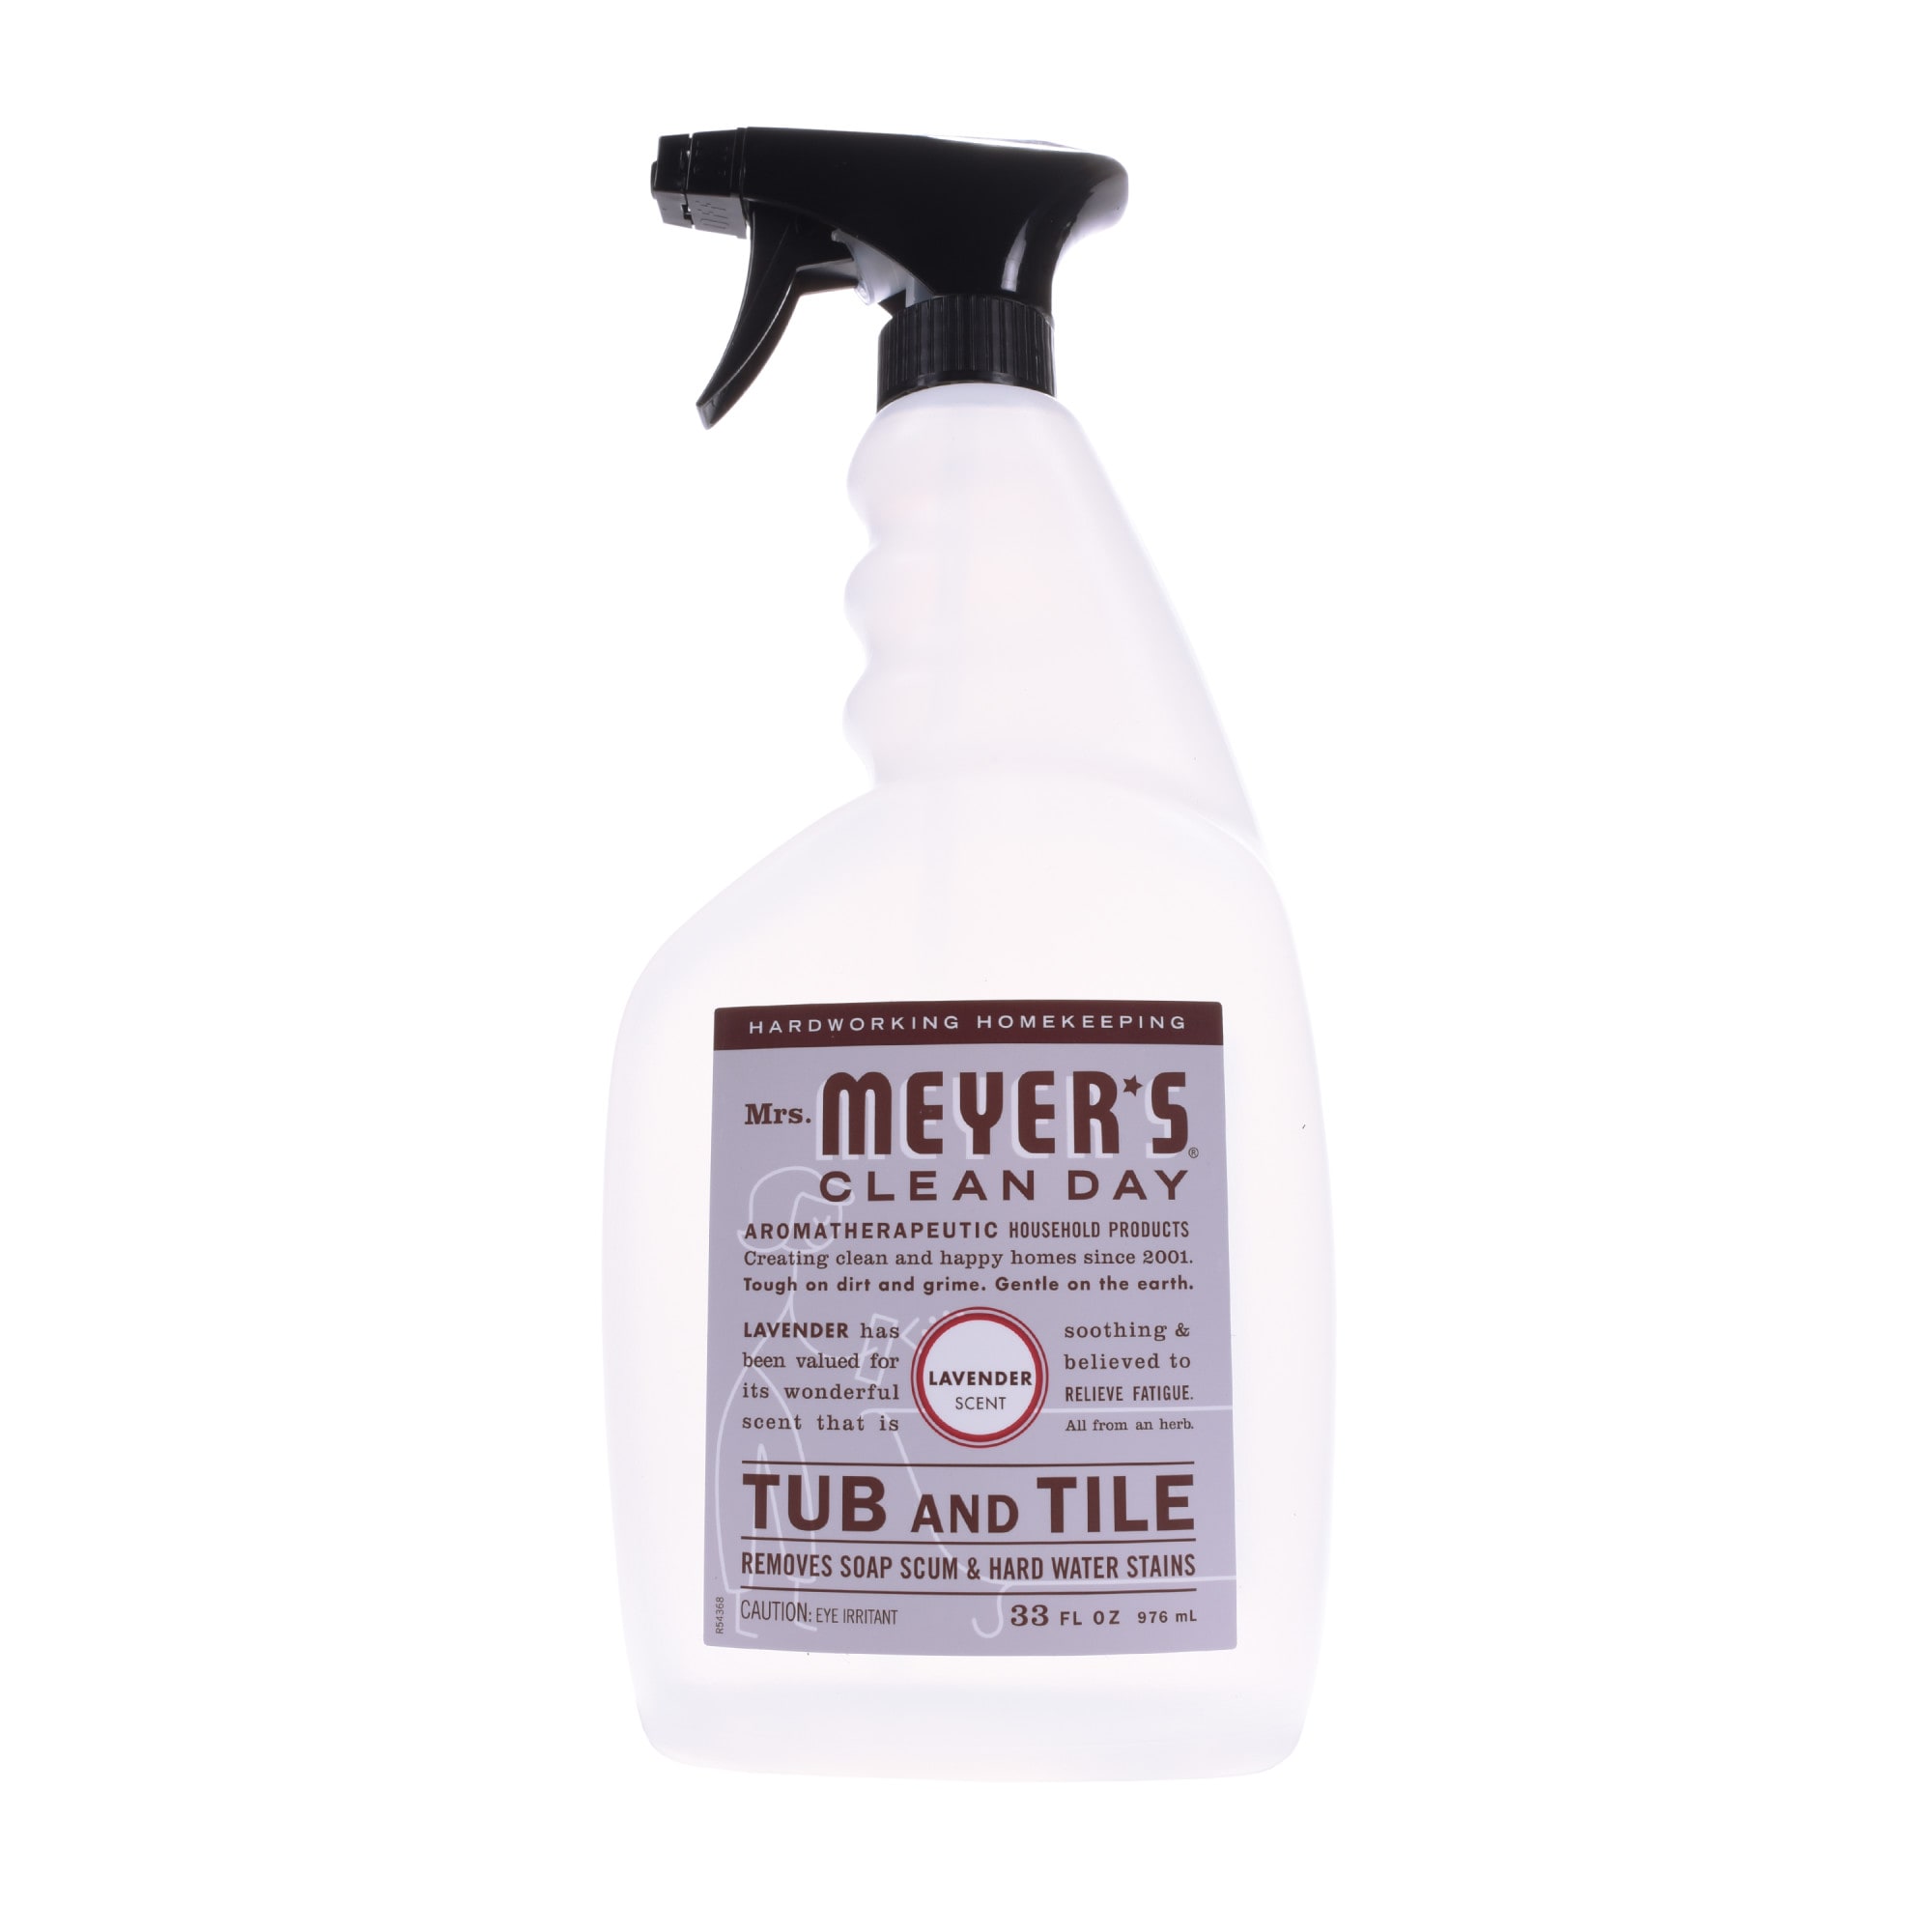 Shop MRS MEYERS CLEAN DAY Lavender All-Purpose Cleaner, Dish Soap